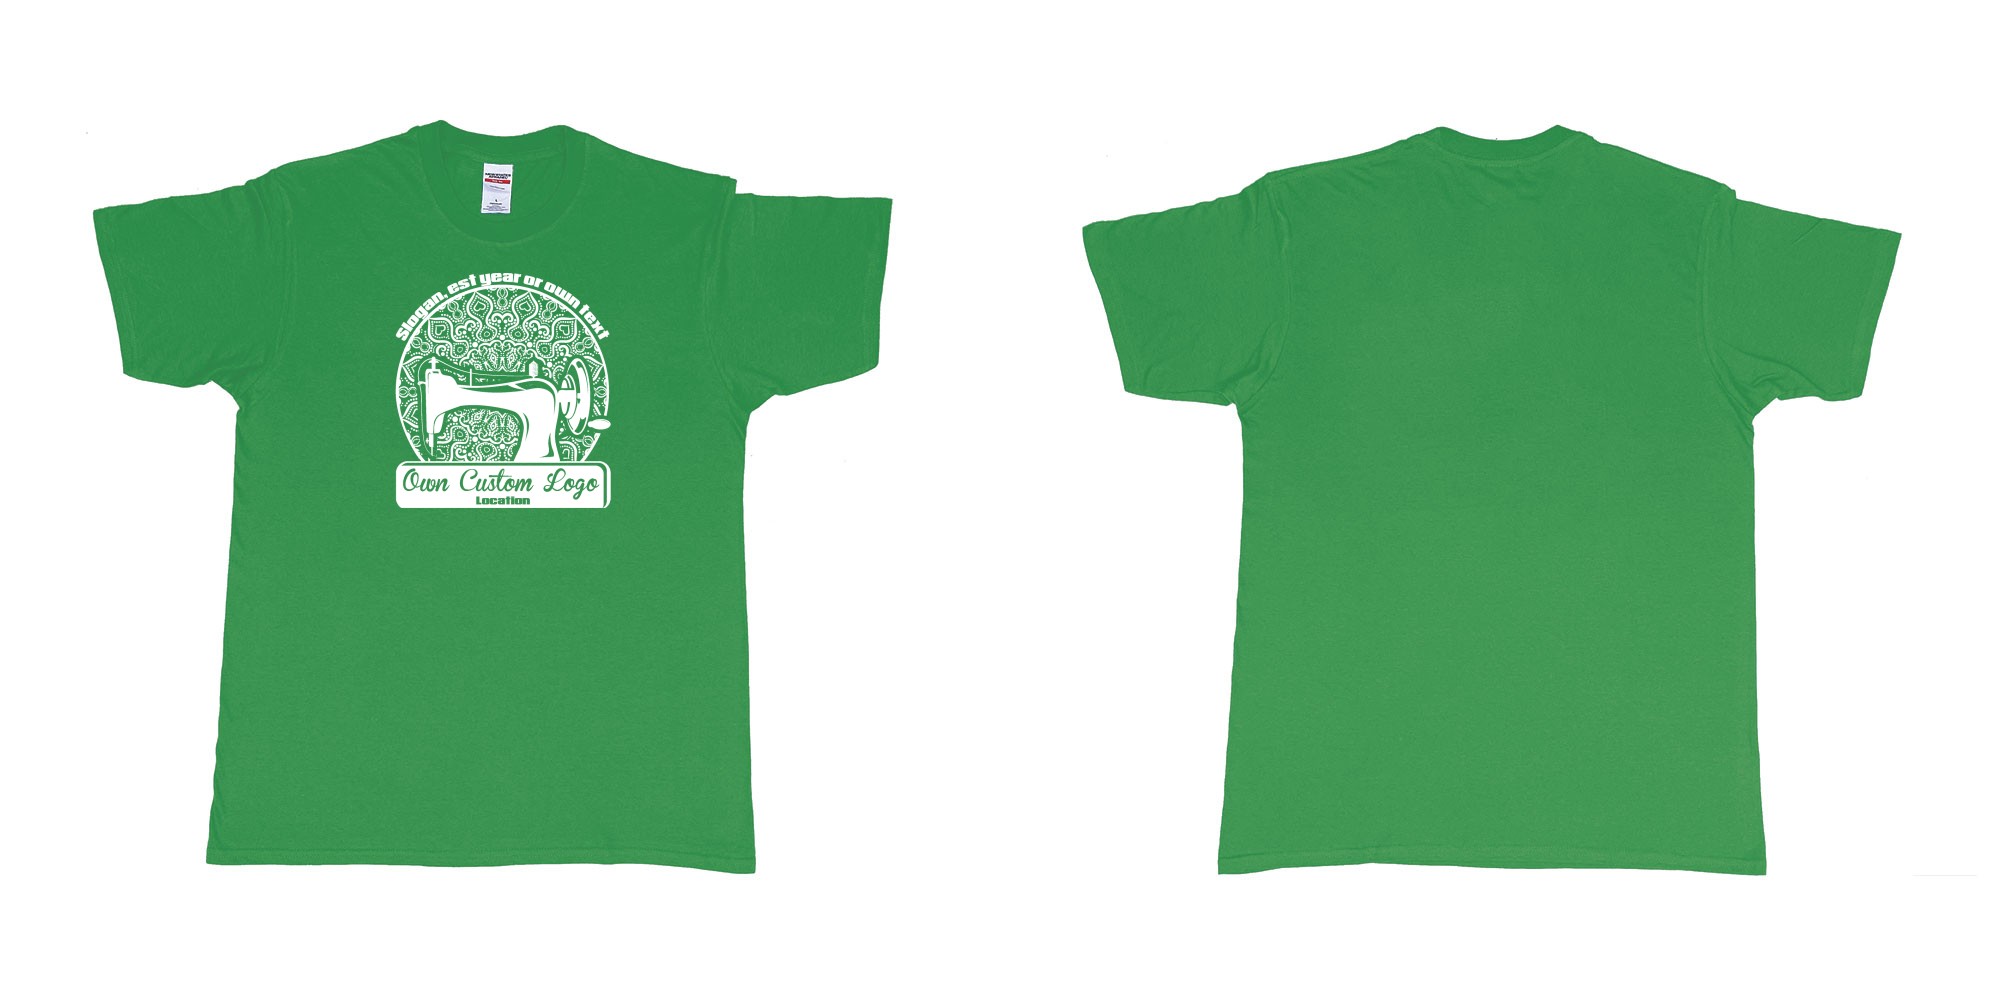 Custom tshirt design sewing machine in fabric color irish-green choice your own text made in Bali by The Pirate Way